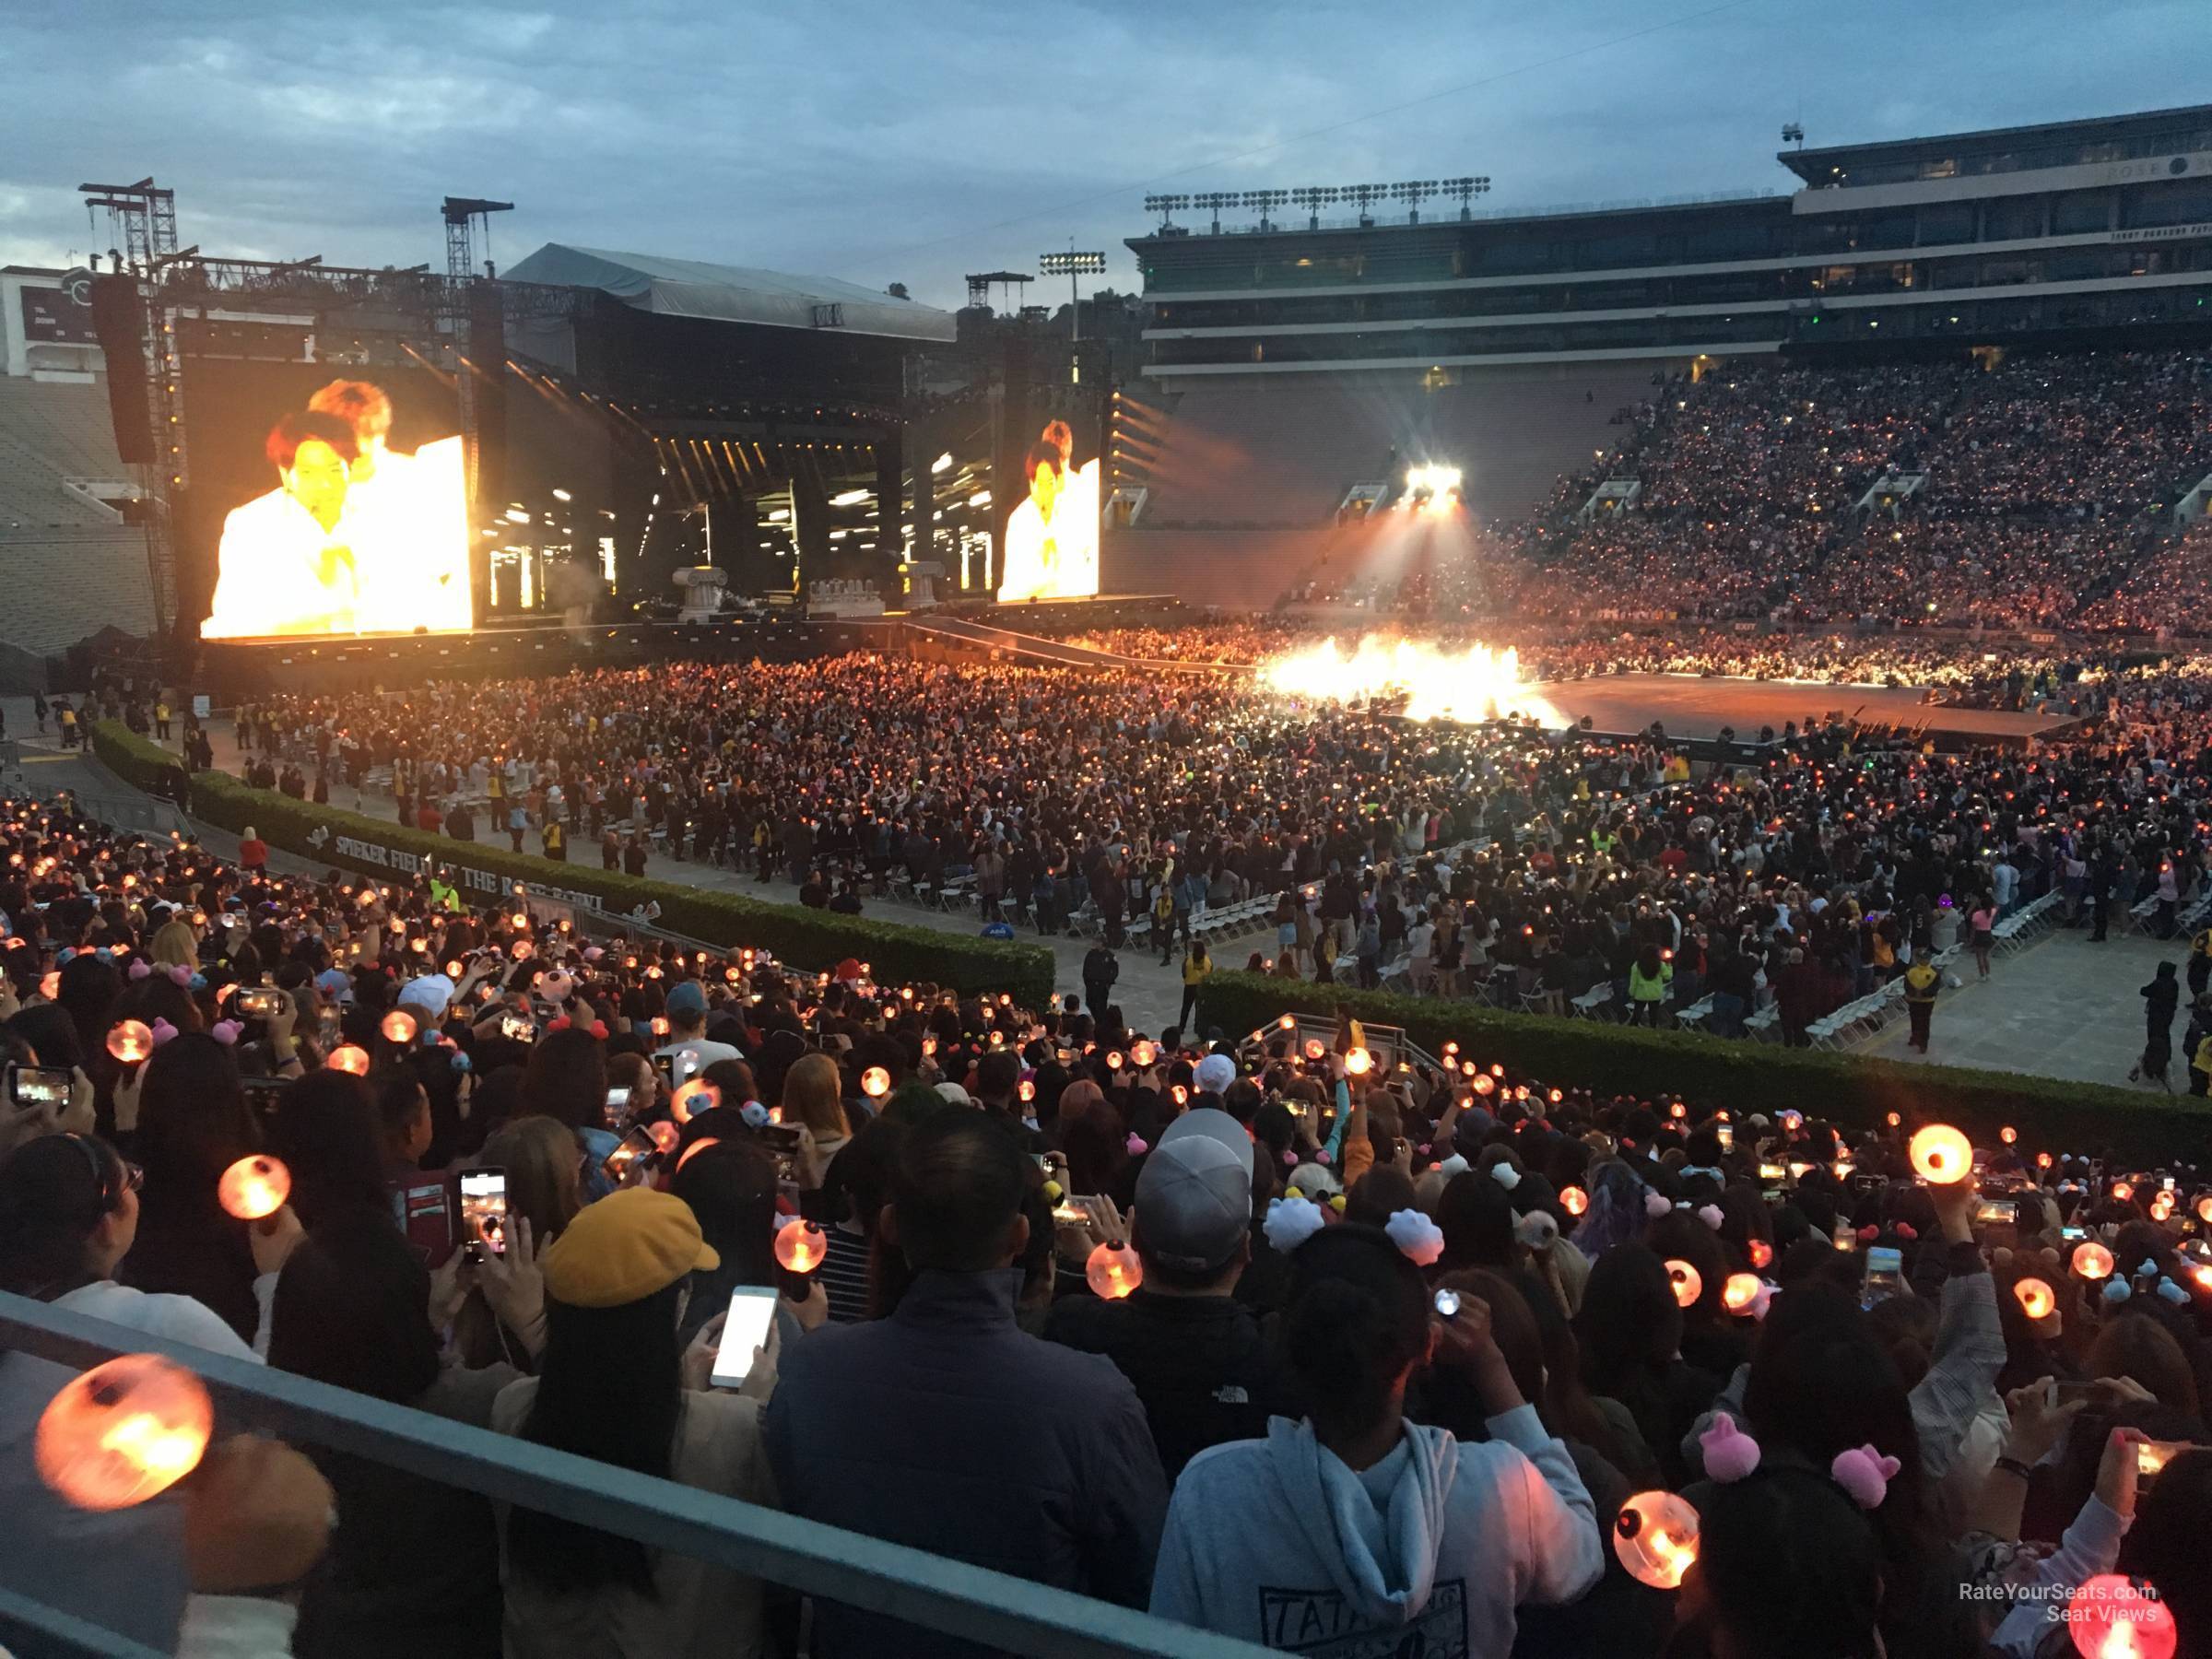 section 7, row 30 seat view  for concert - rose bowl stadium